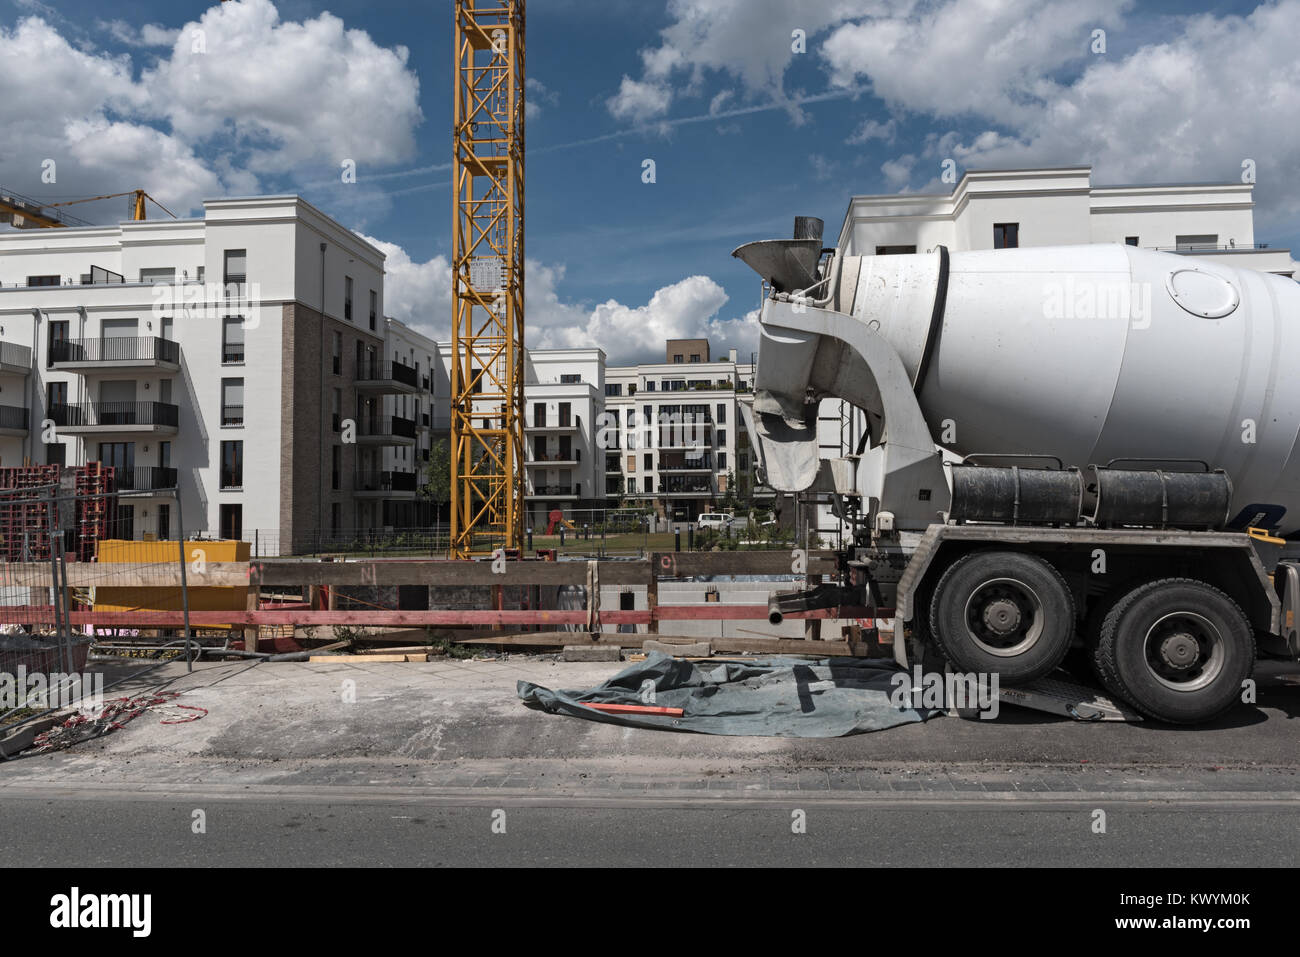 Construction site in a new district Europaviertel Frankfurt am Main, Germany Stock Photo